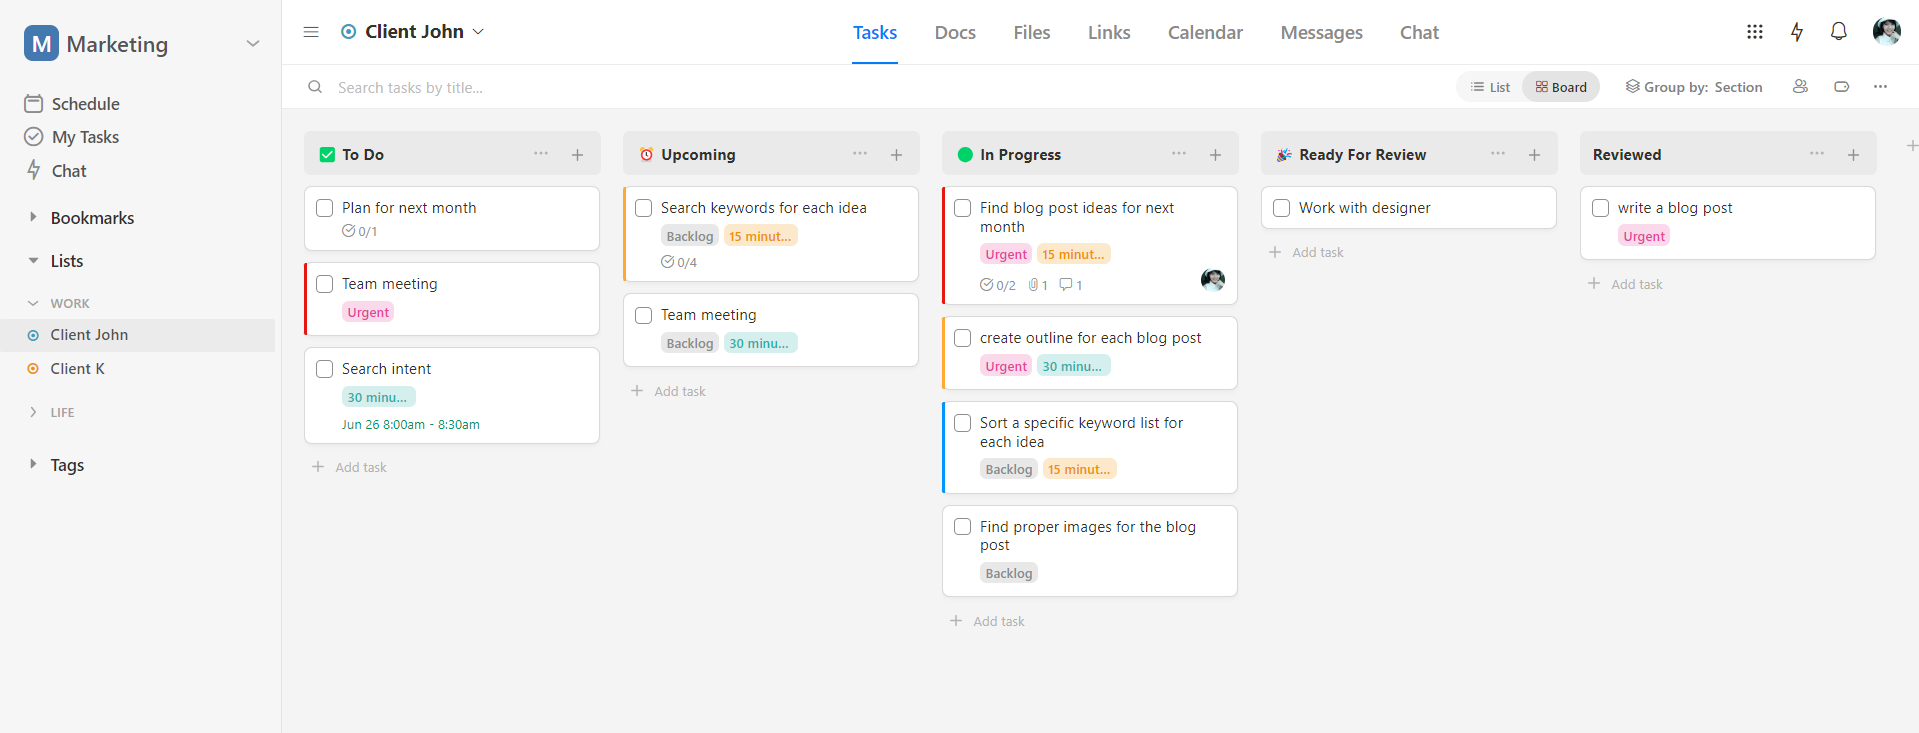 Upbase's board view - making it a good alternative to Smartsheet and Trello